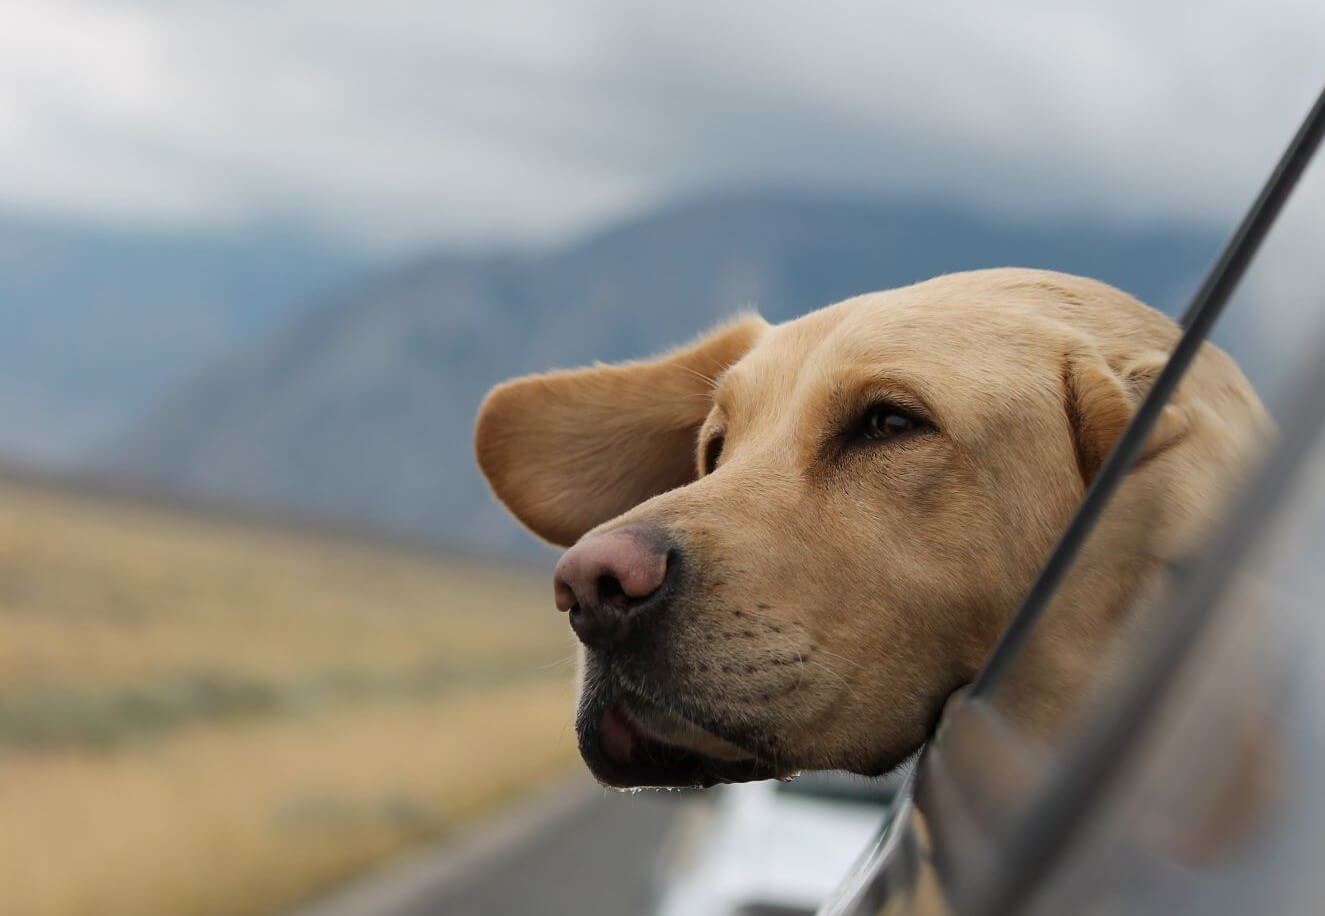 Large yellow Labrador with its head hanging out a car window showing car travel with Labradors.